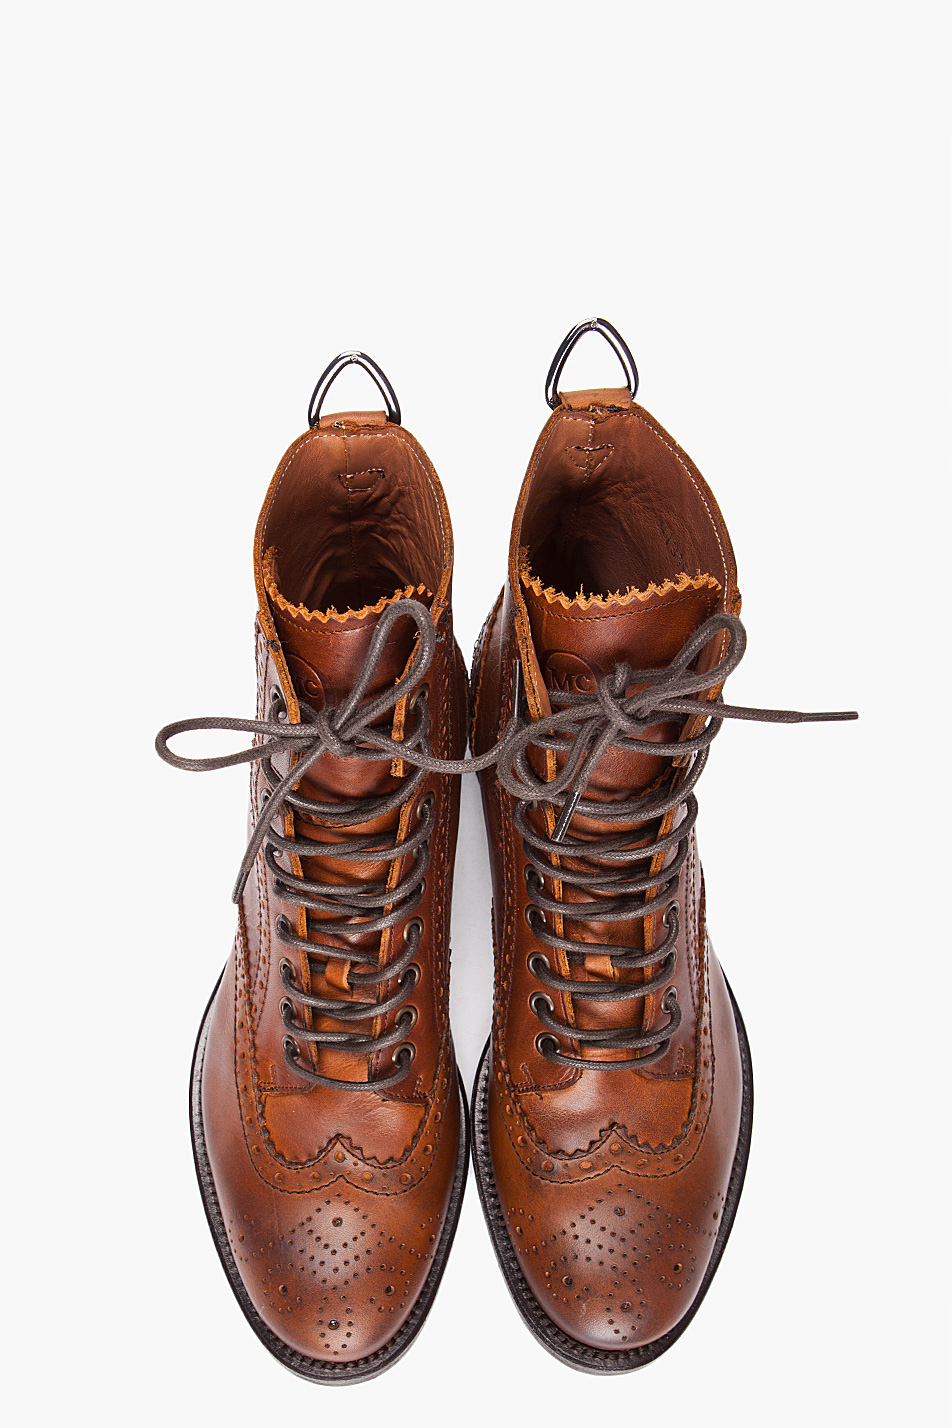 McQ Brogue Boots in Tan (Brown) for Men - Lyst